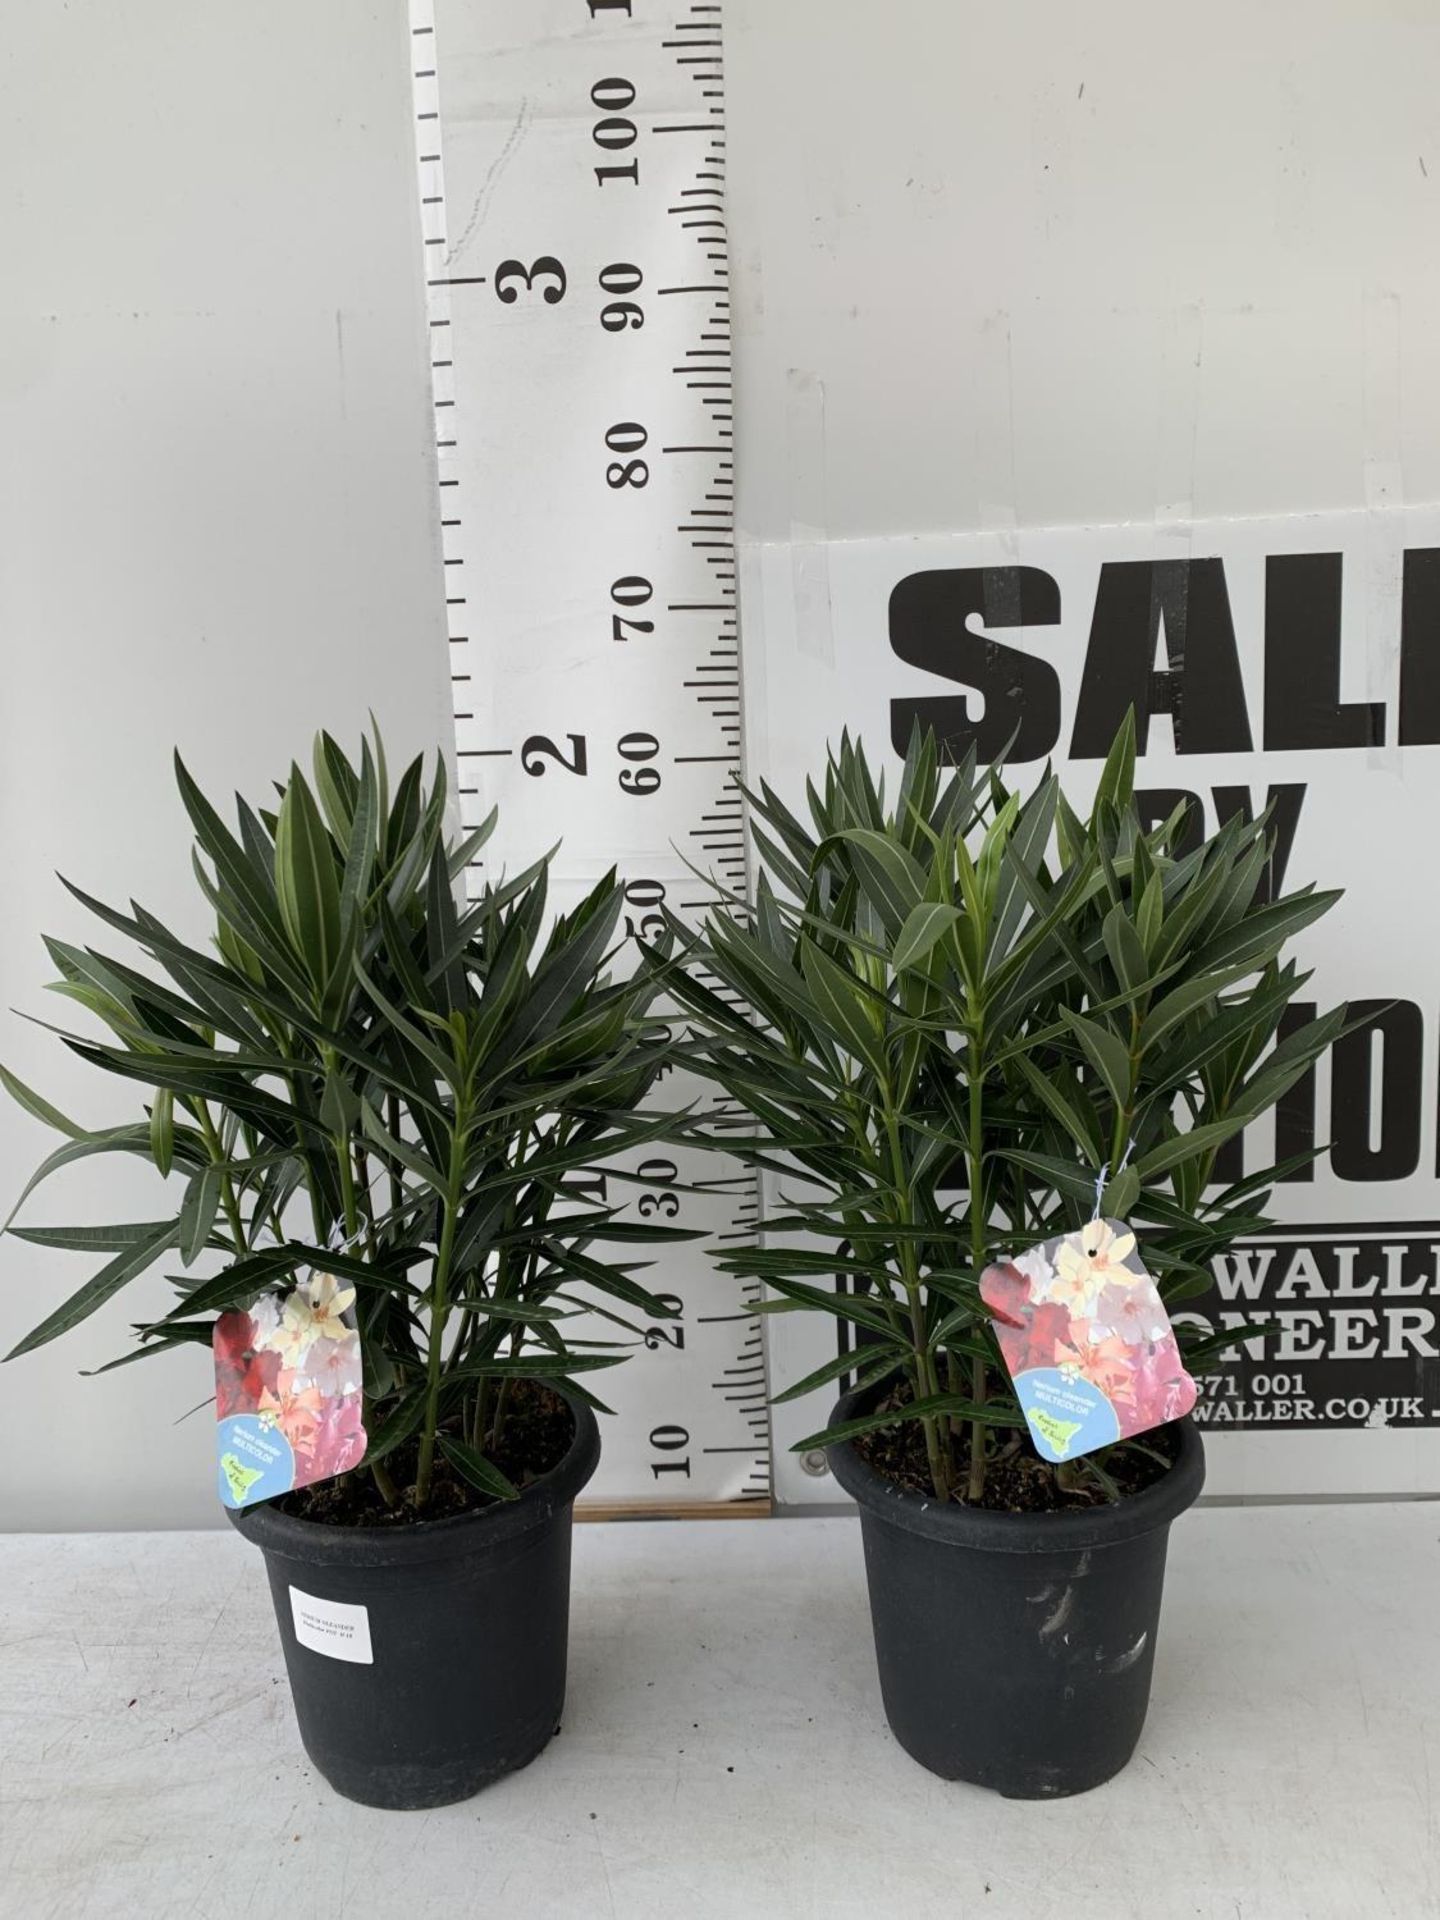 TWO OLEANDER NERIUM SHRUBS MULTICOLOURED APPROX 60CM TALL IN 4 LTR POTS PLUS VAT TO BE SOLD FOR - Image 5 of 20